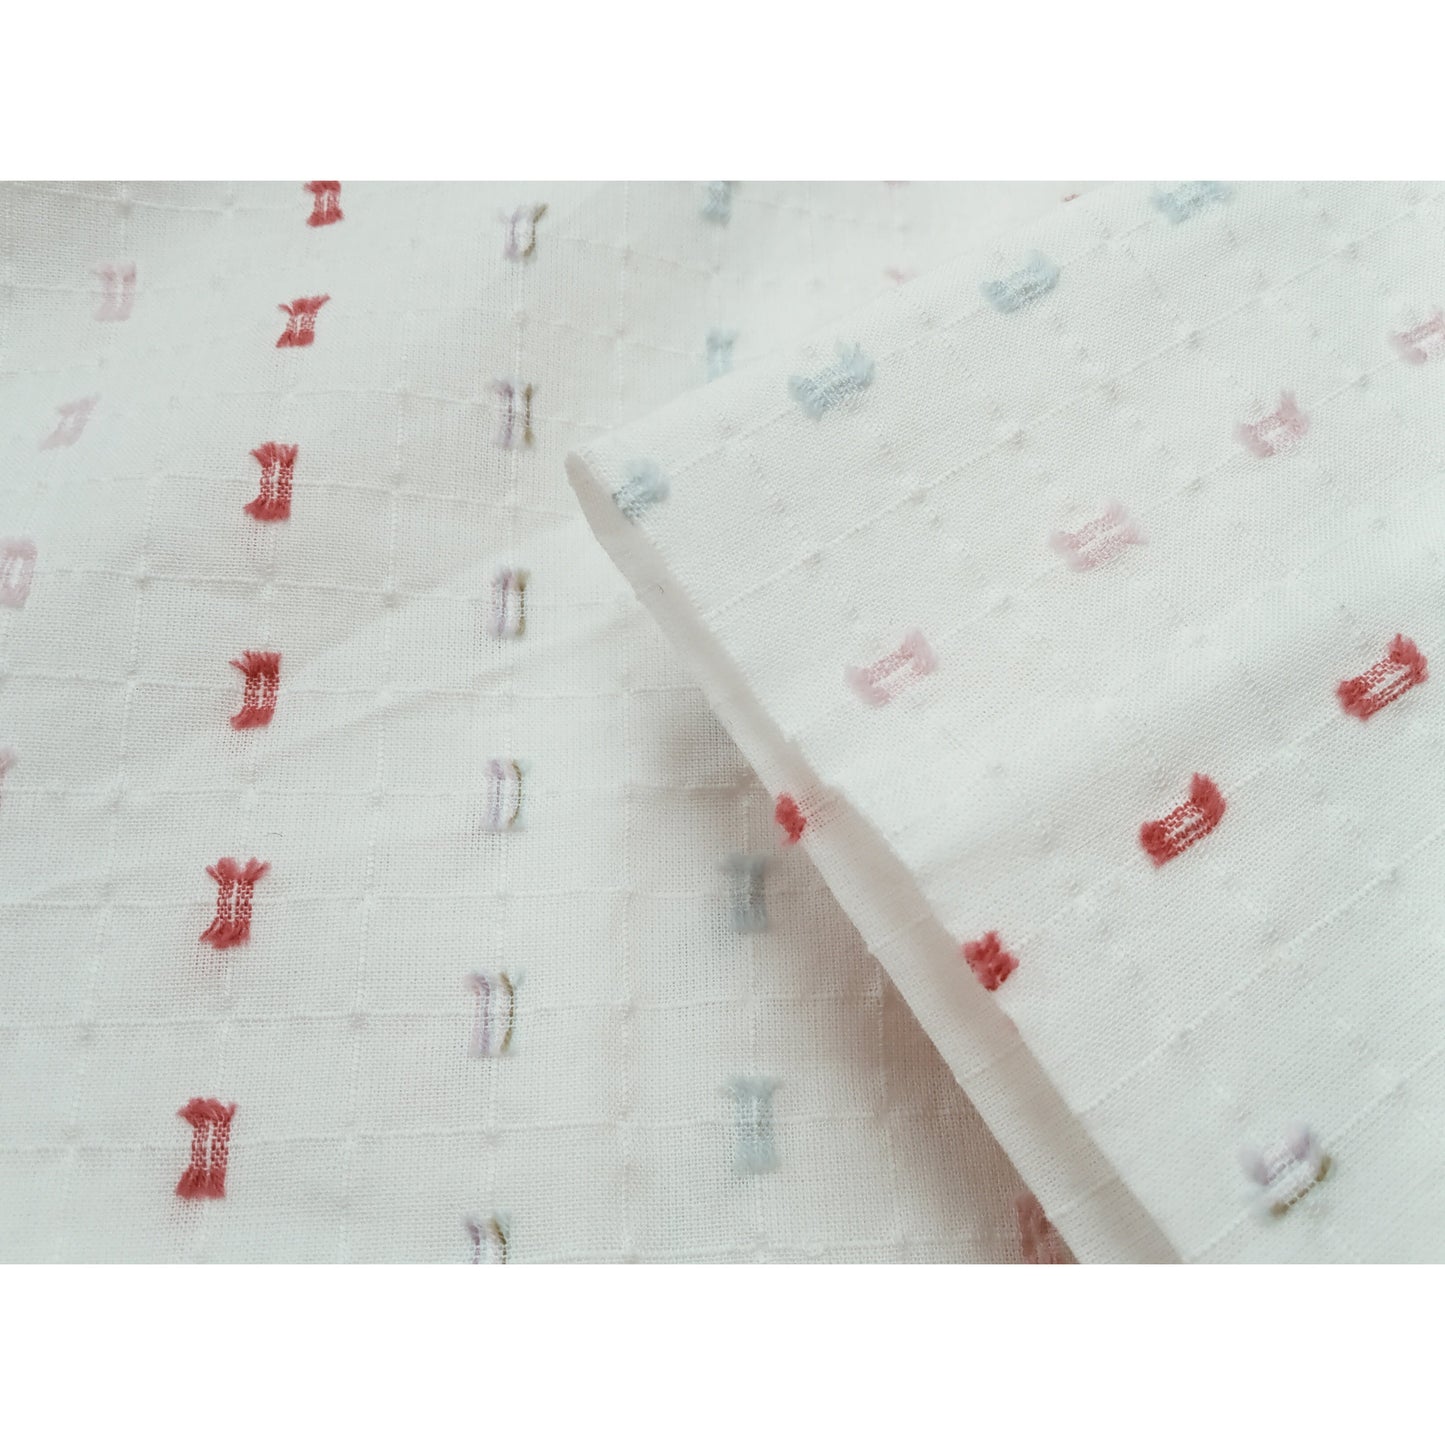 Bows embellished woven cotton fabric - 1.50mtrs